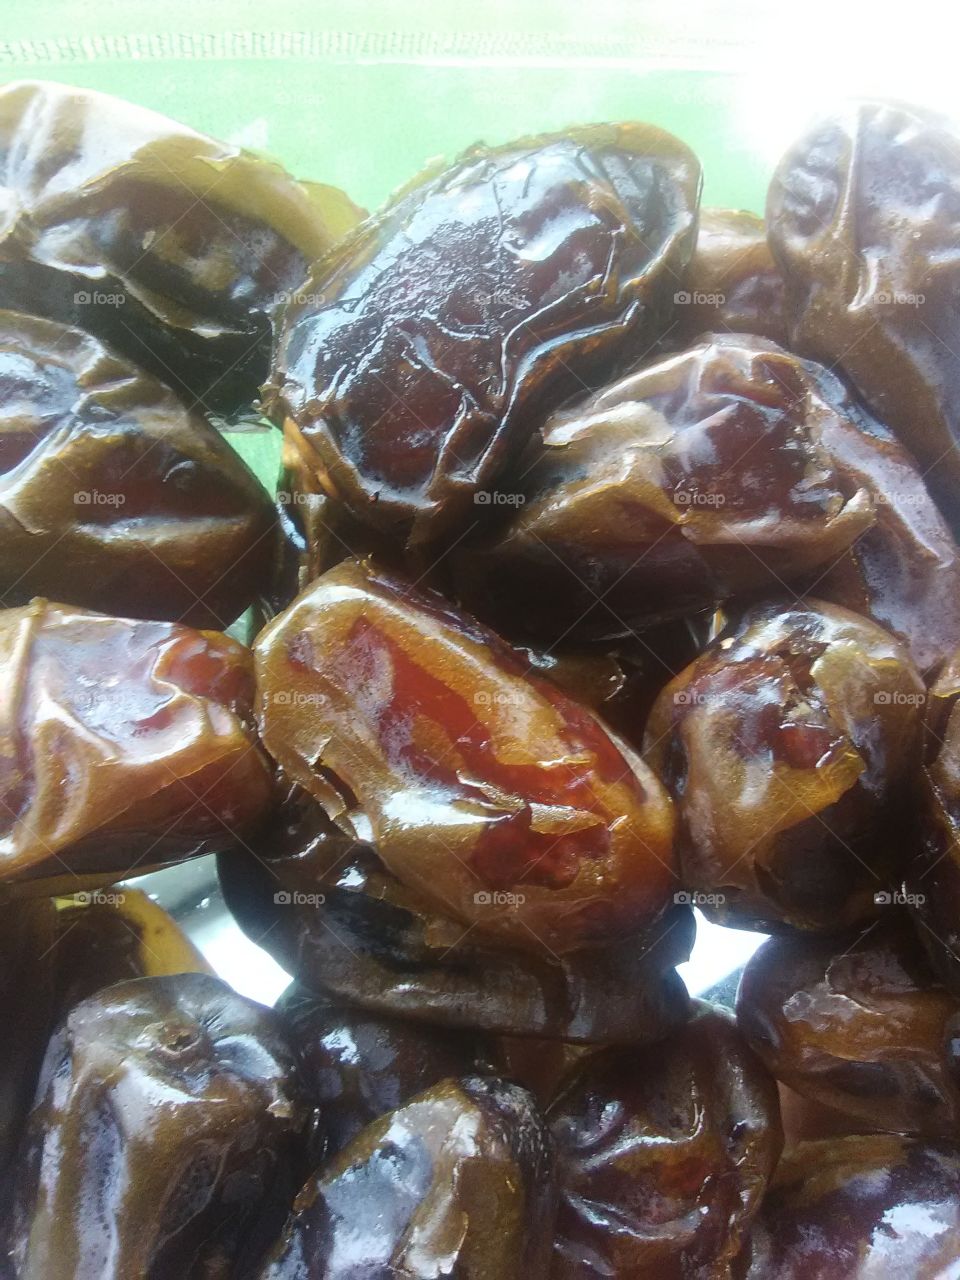 mmmm dates I love the energy these give me.